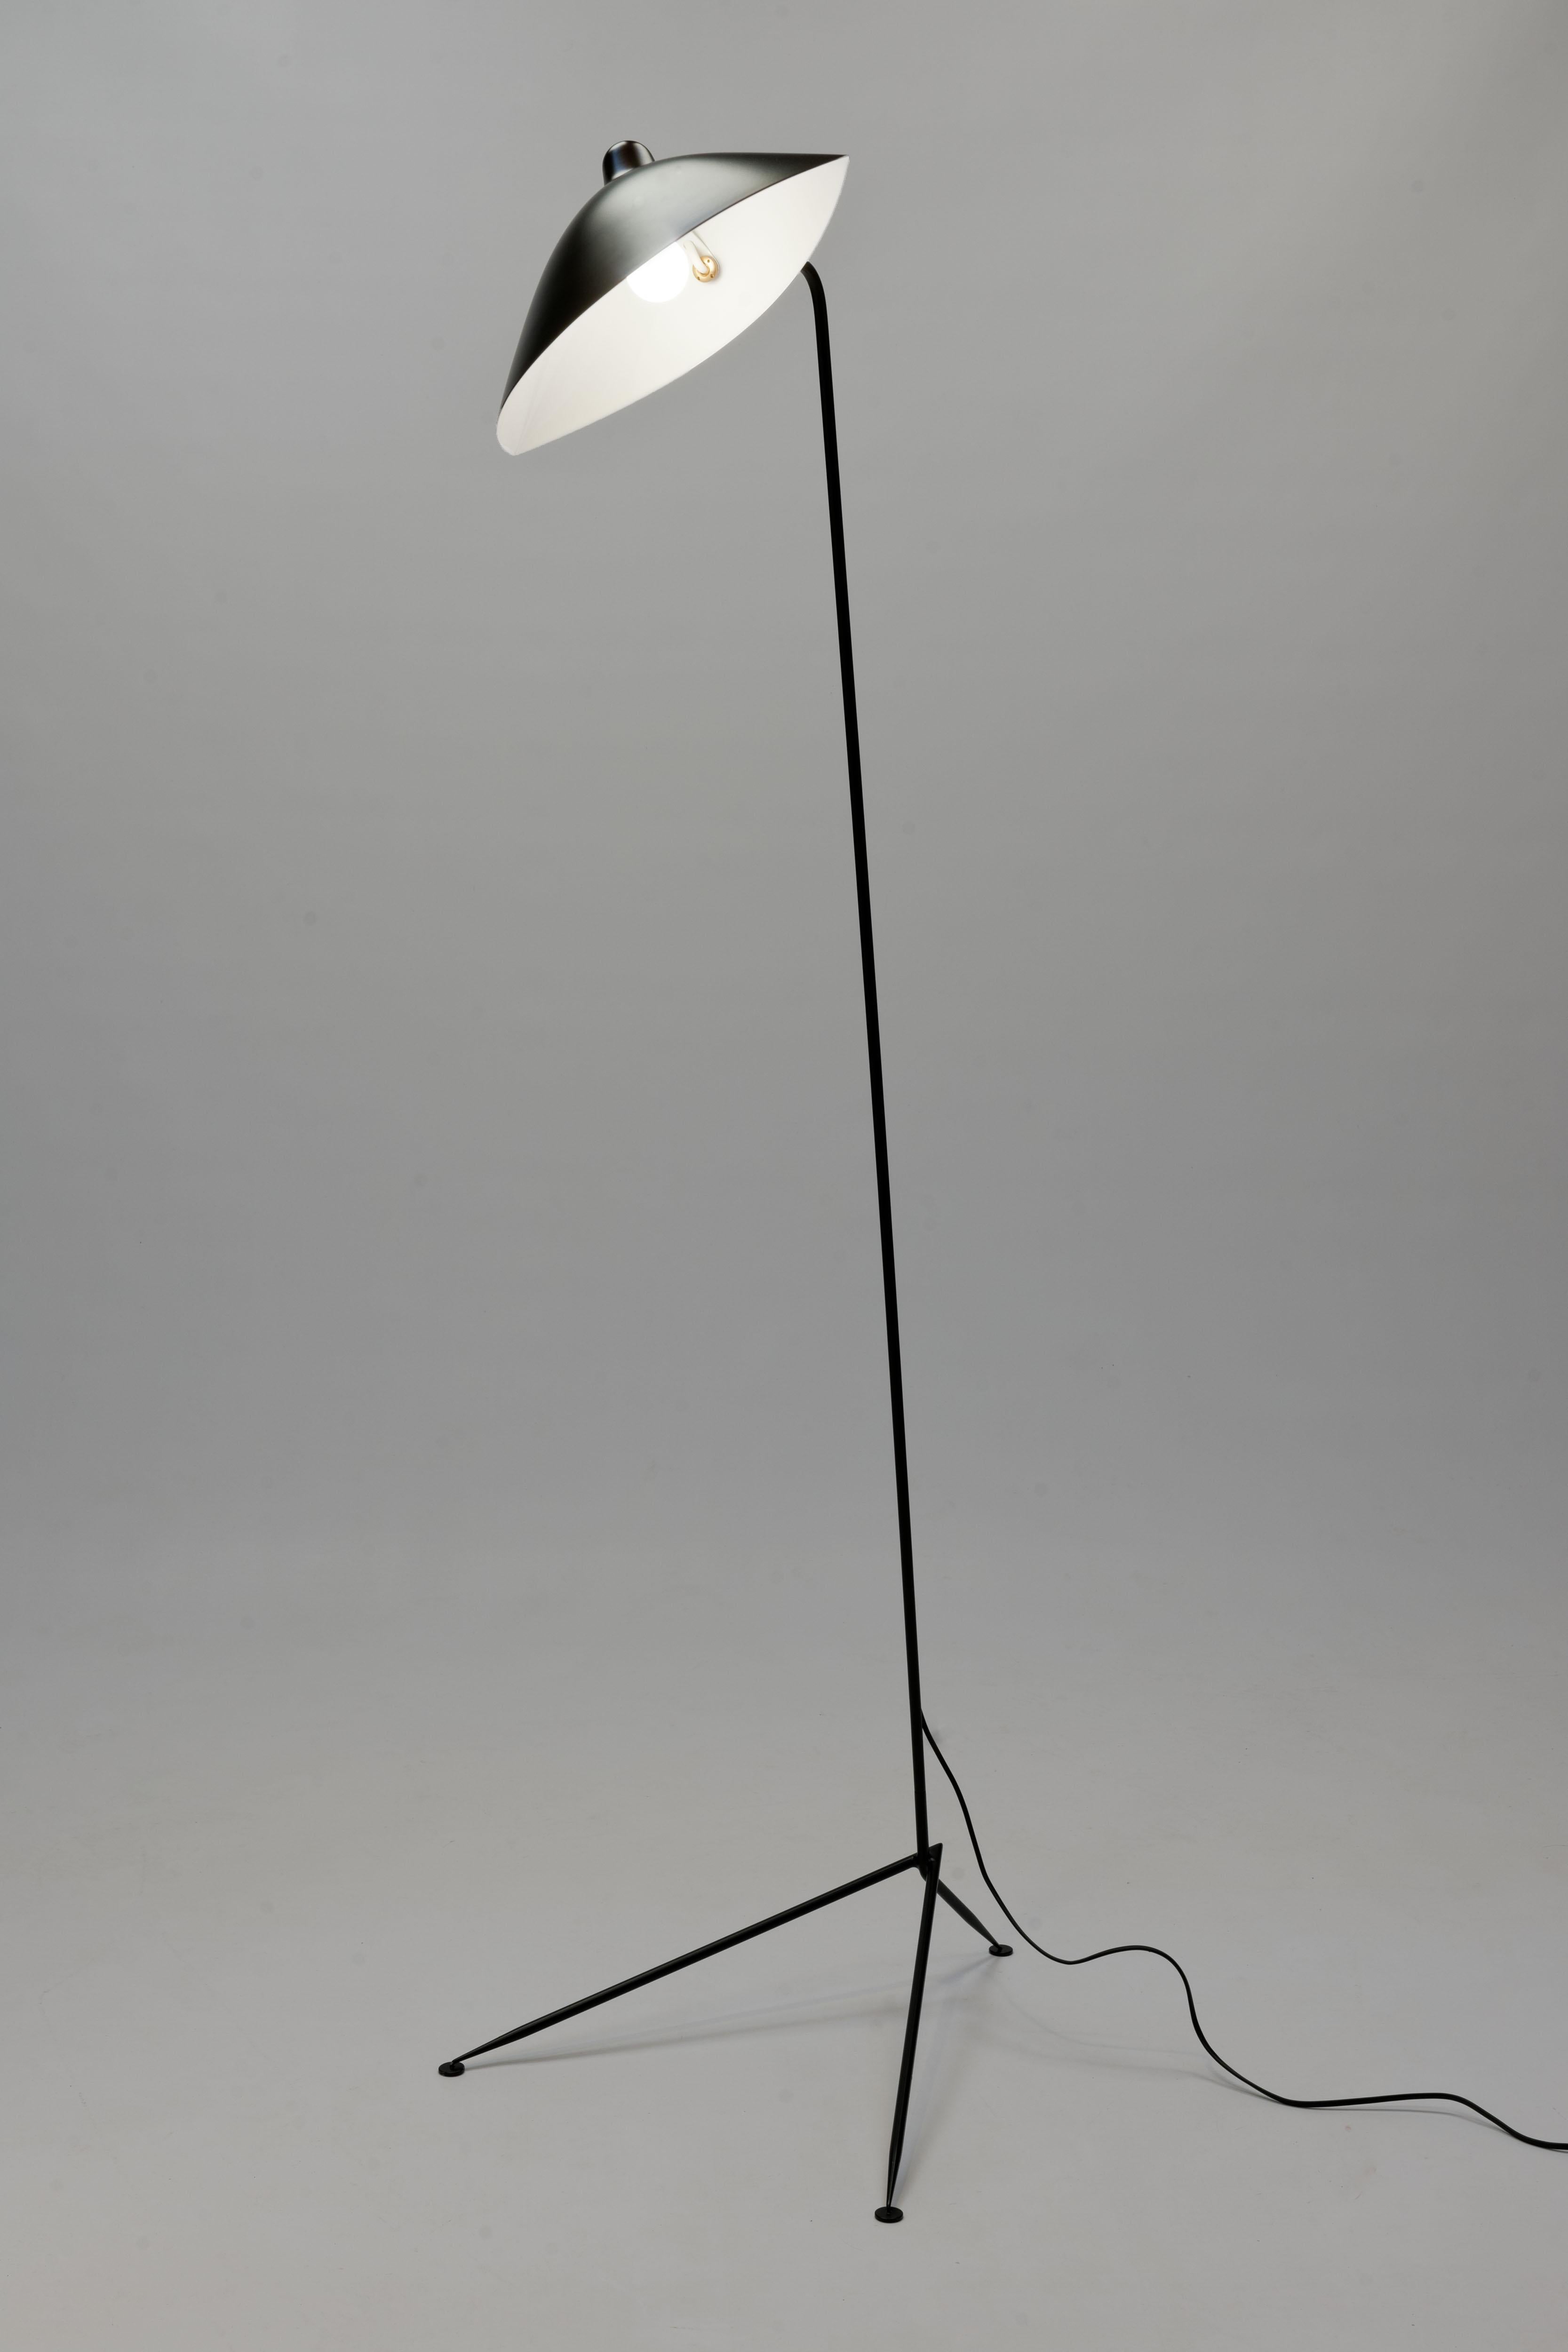 French Serge Mouille 'Lampadaire Droit' Floor Lamp, Certificate Included